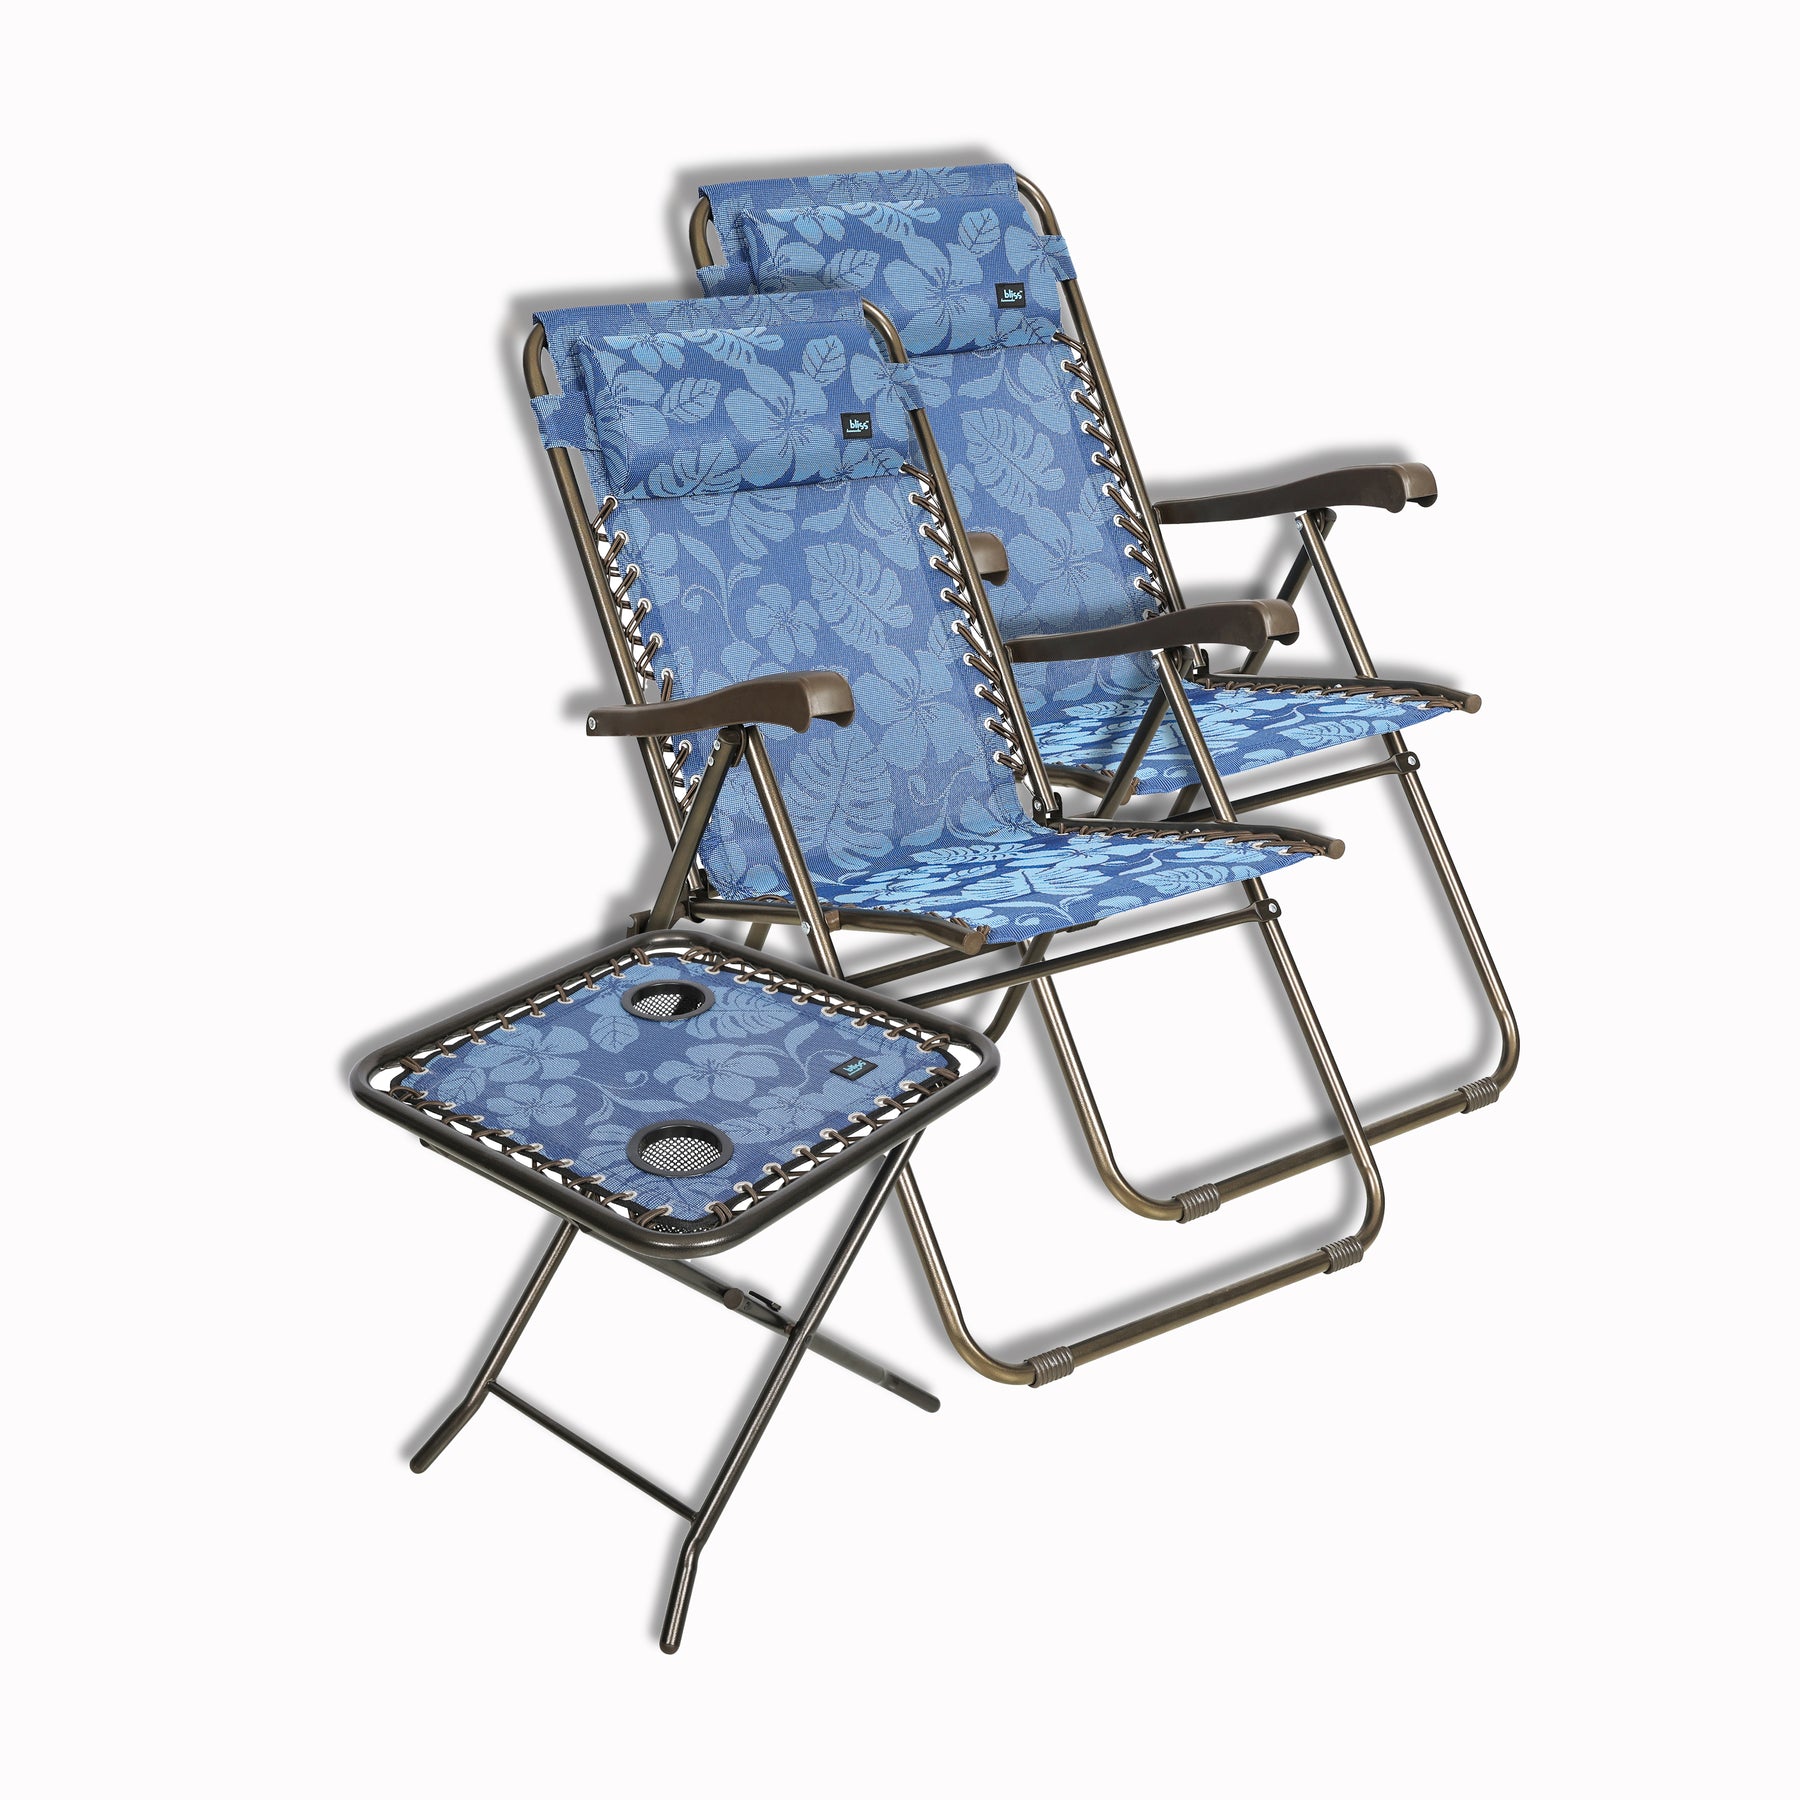 Set of 2 Bliss Hammocks 26-inch Wide Reclining Sling Chair with Pillow plus a Bliss Hammocks 20-inch Folding Side Table with 2 Built-In Cup Holders in the blue flowers variation.